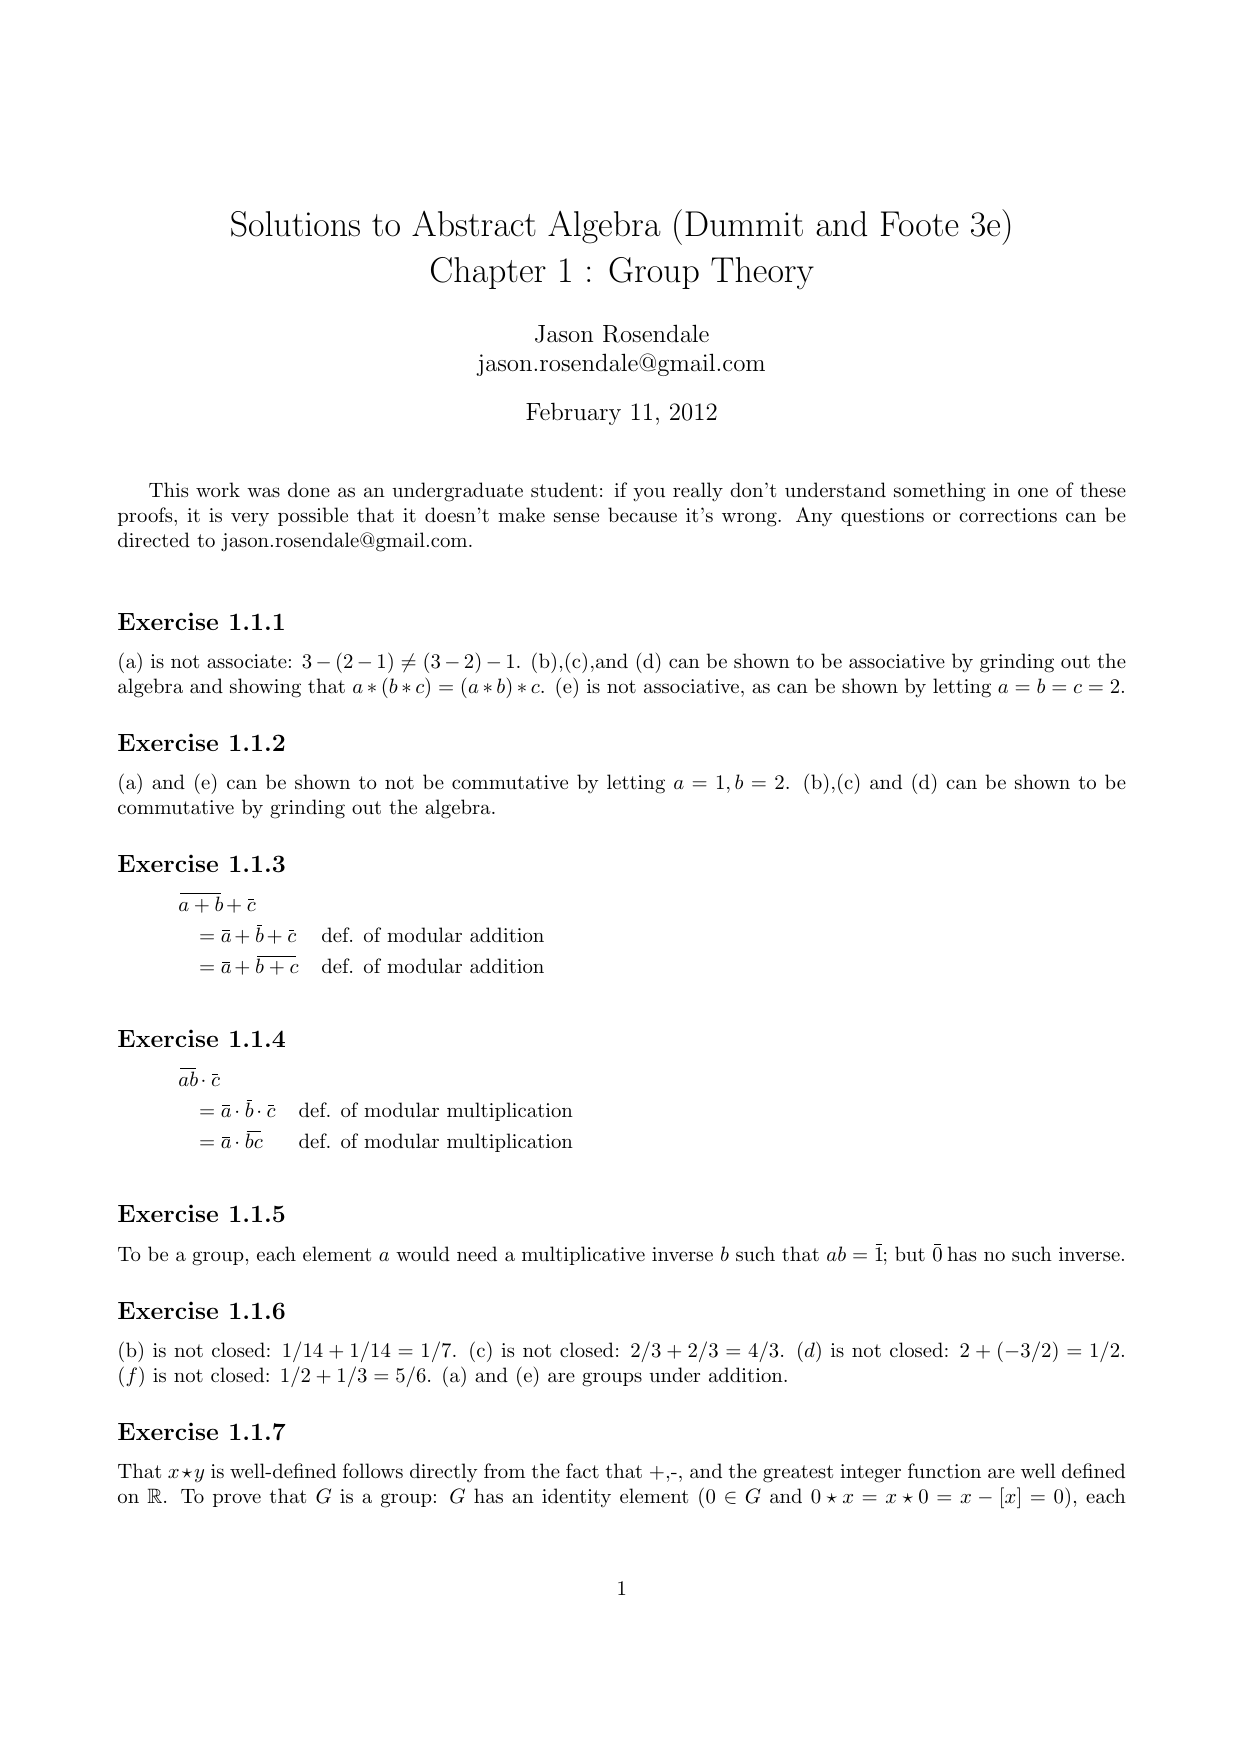 Solutions To Abstract Algebra Chapter 1 Dummit And Foote 3e